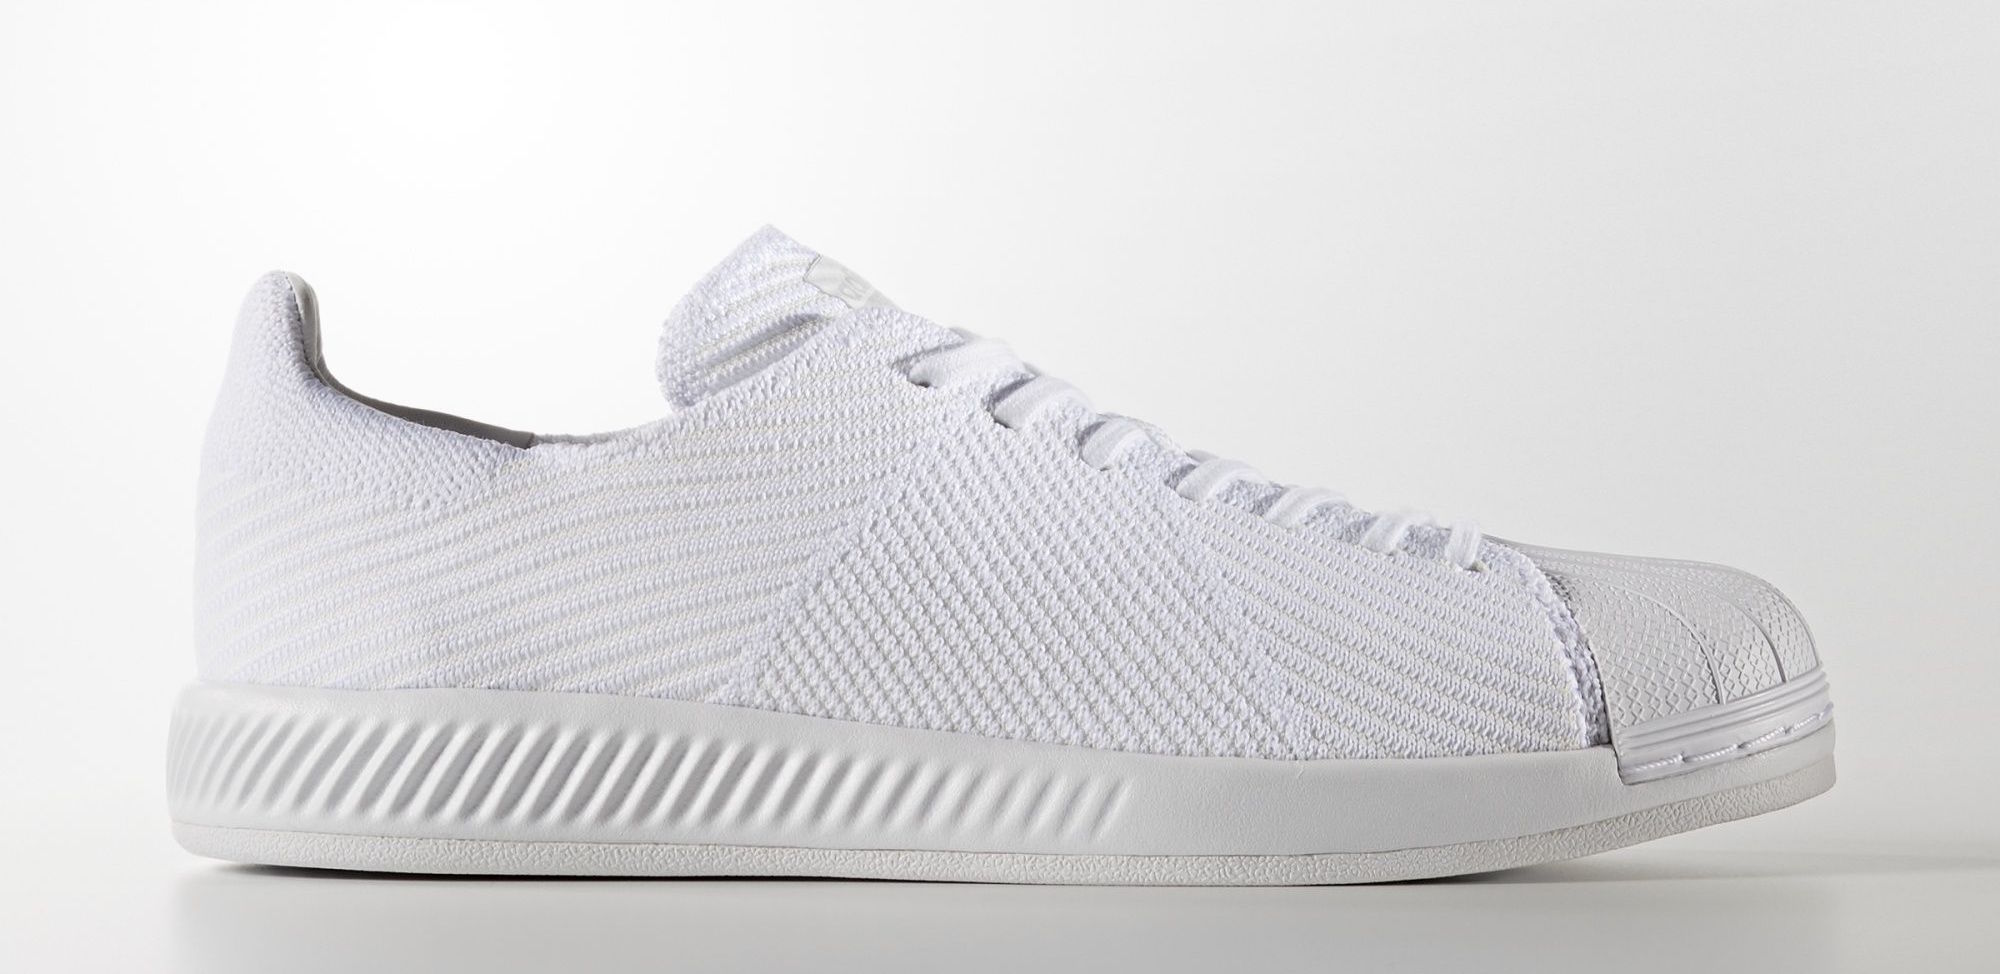 parade Middle The beach The adidas Superstar to Feature Bounce and Primeknit - WearTesters